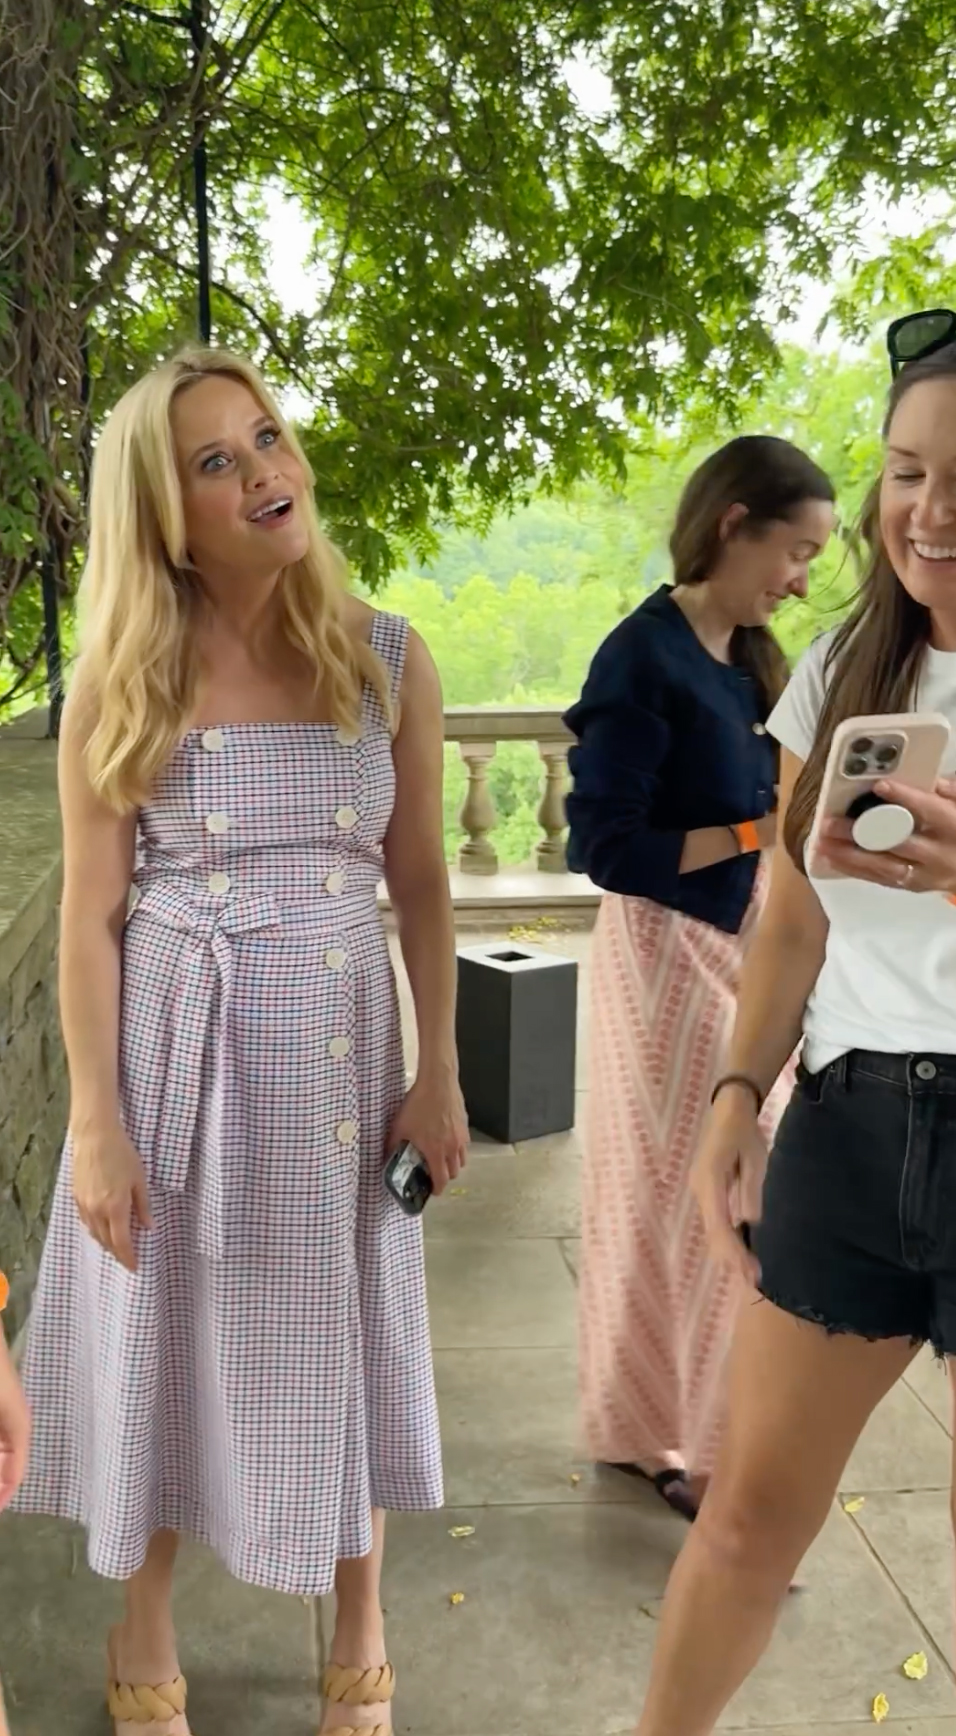 Reese Witherspoon switched to another outfit and wore a lavender dress in the Instagram video